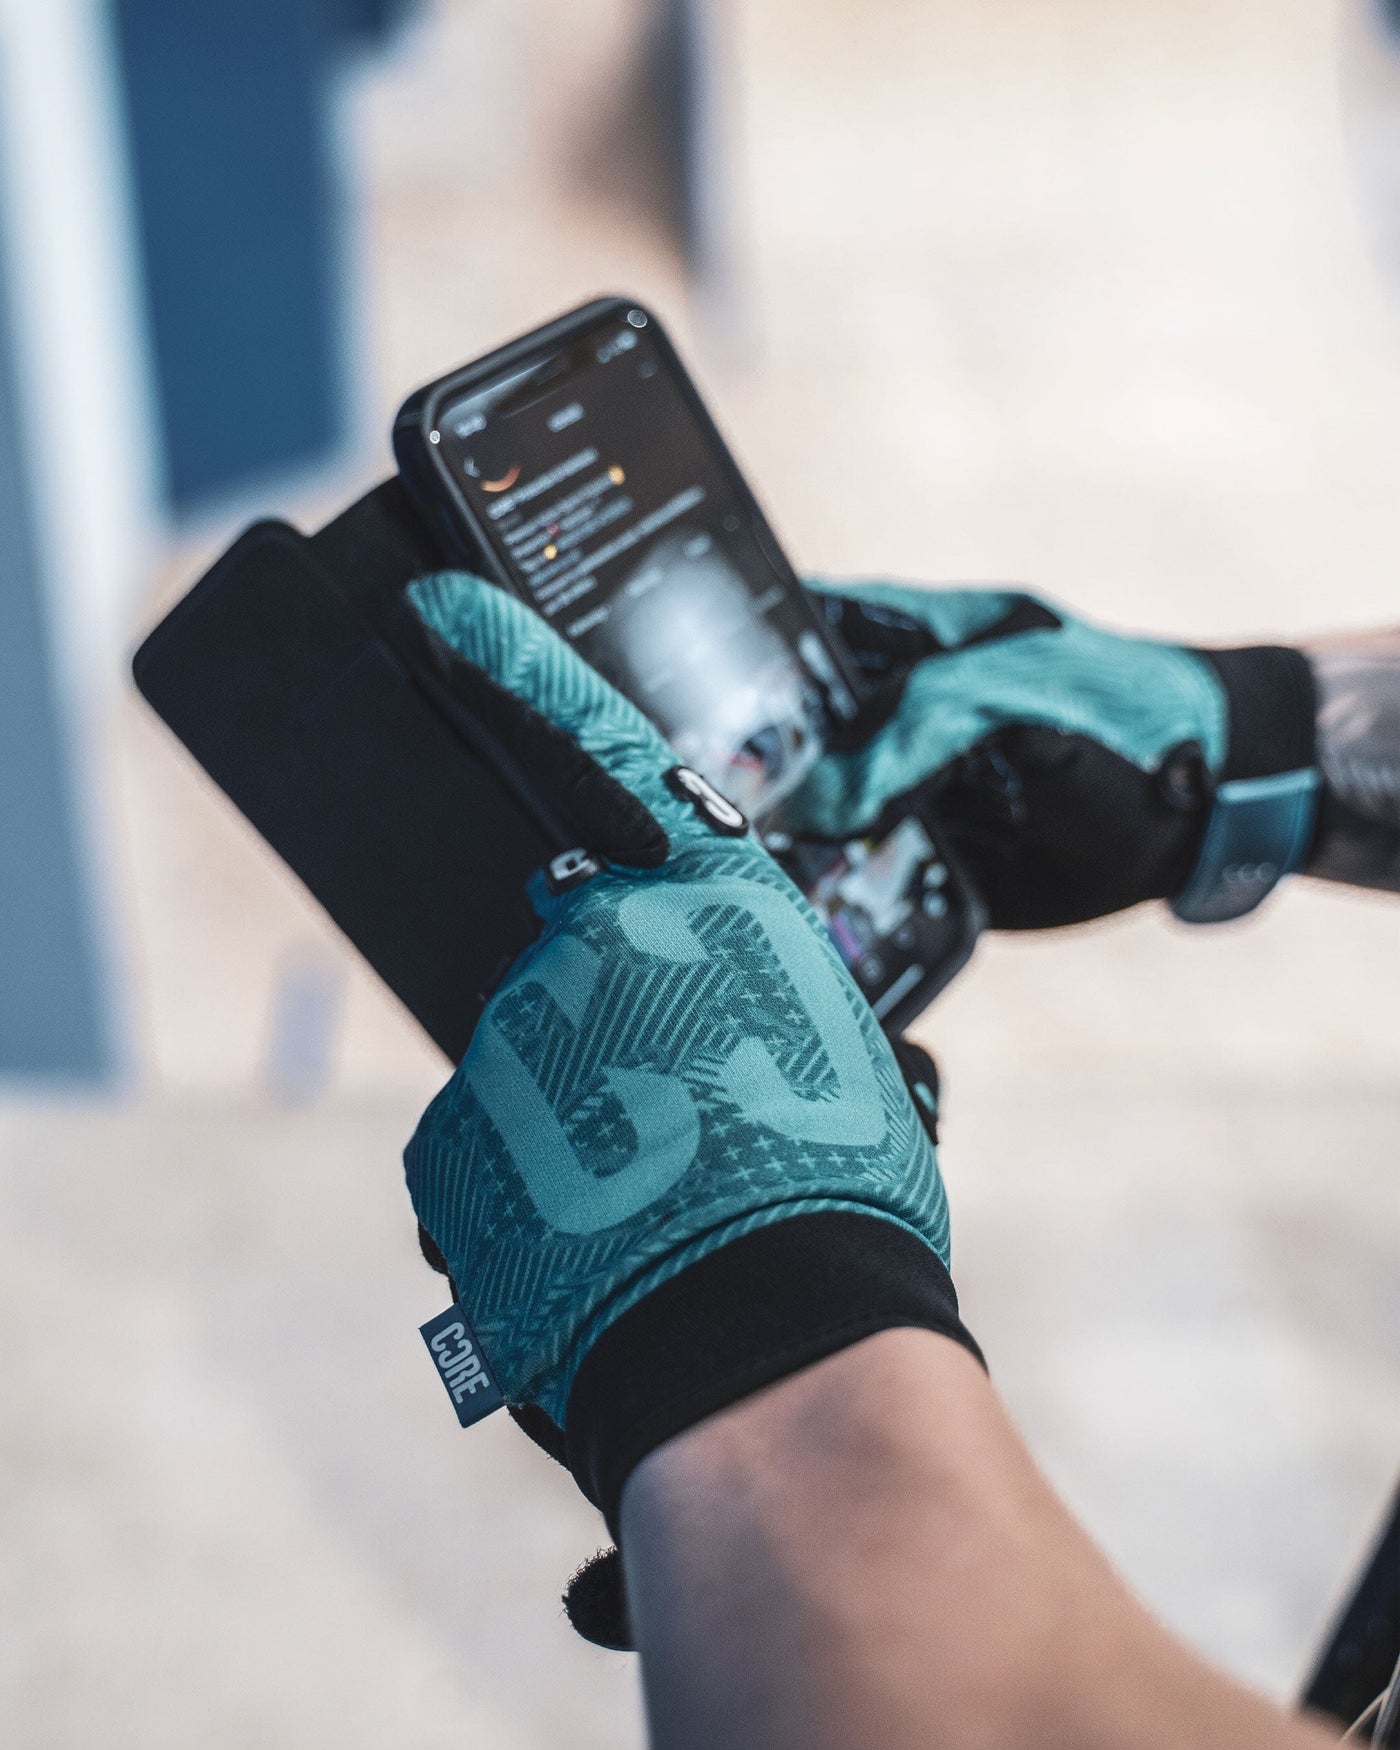 CORE Protection BMX Gloves Teal I Bike Gloves Using Phone With Gloves